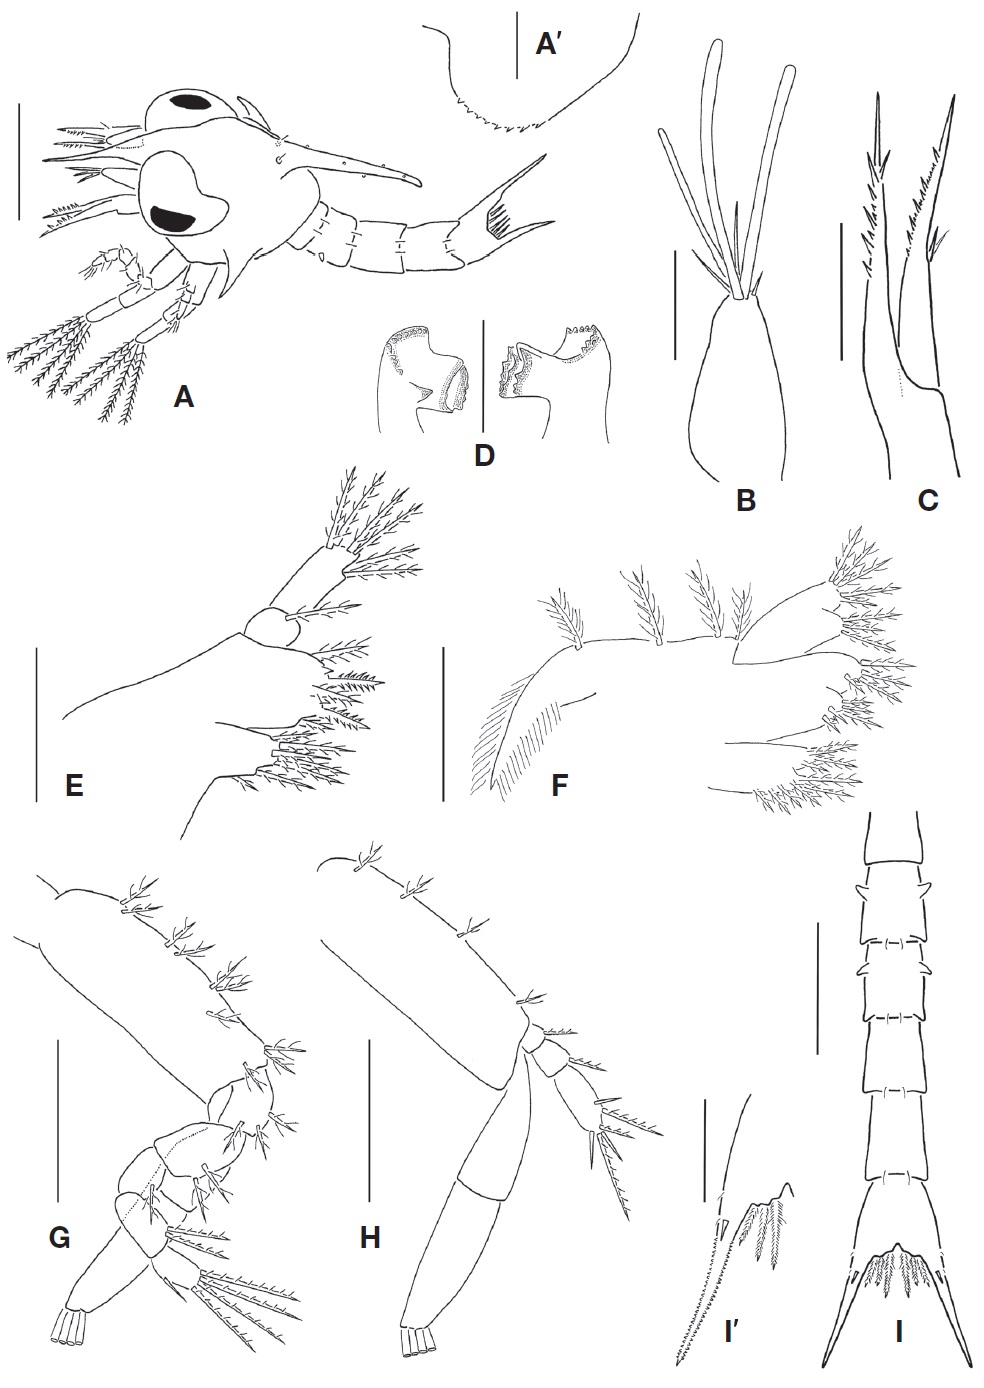 Parapanope euagora, first zoeal stage. A, Lateral view; A', Lateral expansion of carapace; B, Antennule; C, Antenna; D, Mandibles; E, Maxillule; F, Maxilla; G, First maxilliped; H, Second maxilliped; I, Dorsal view of abdomen and telson; I', Fork of telson. Scale bars: A=0.3 mm, I=0.2 mm, A', B-H, I'=0.1 mm.